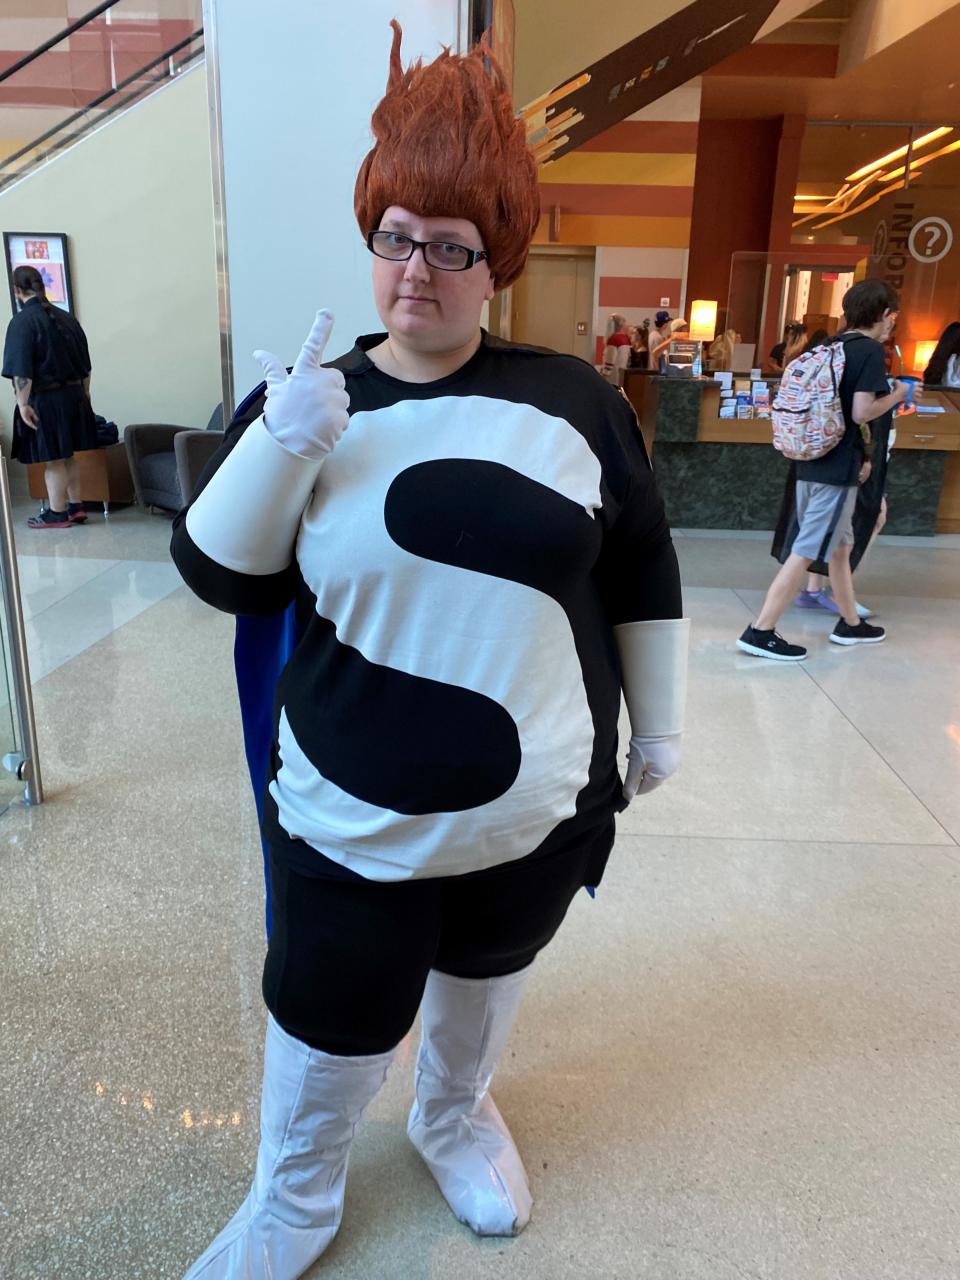 Stacy Pribyl of Goodyear came to Phoenix Fan Fusion on May 29, 2022, dressed as Syndrome, the villain from "The Incredibles."